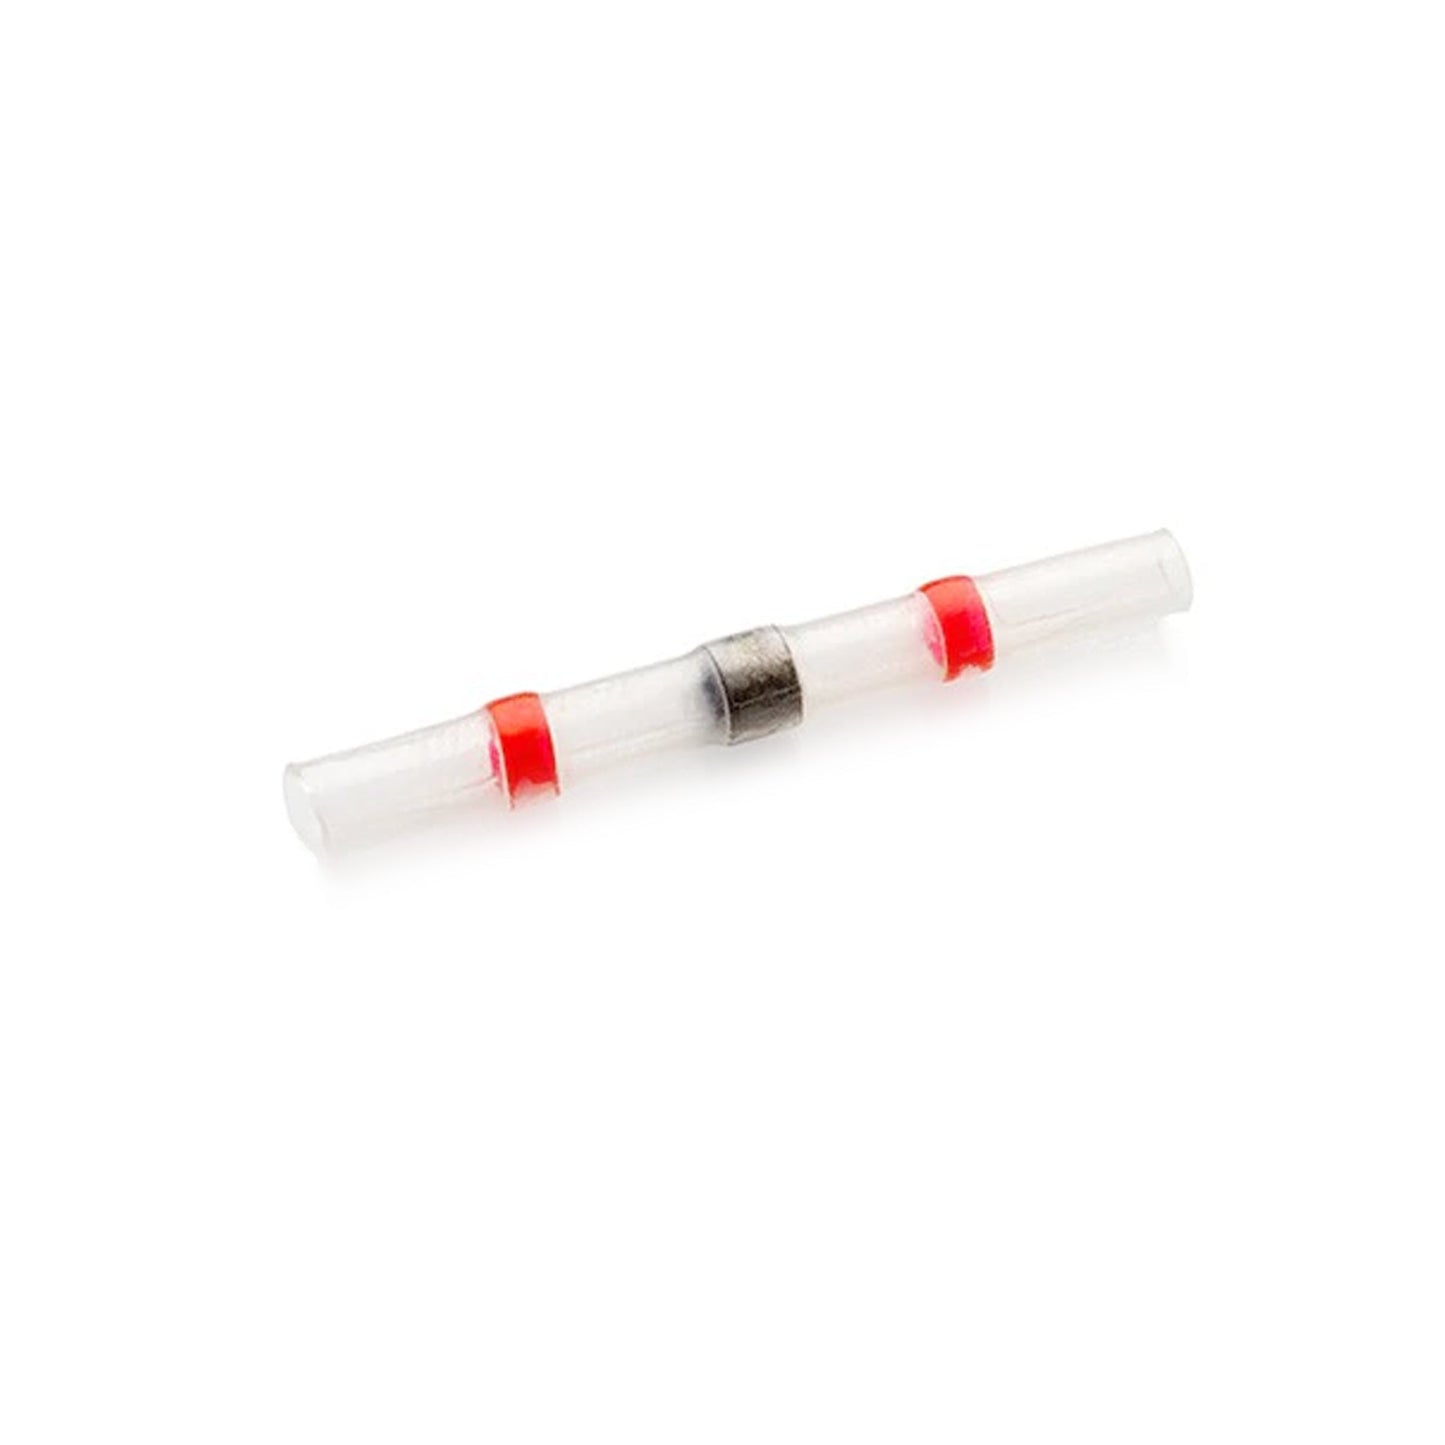 SST-S21 Heat Shrink Sleeve with Solder Ring - Red